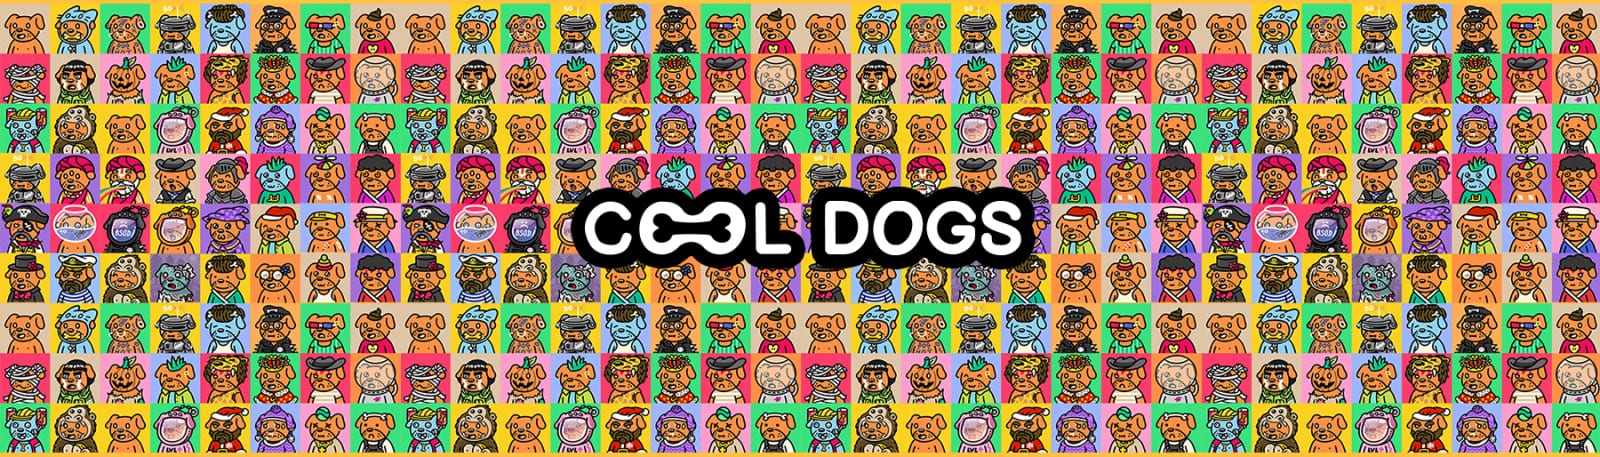 COOLDOGS